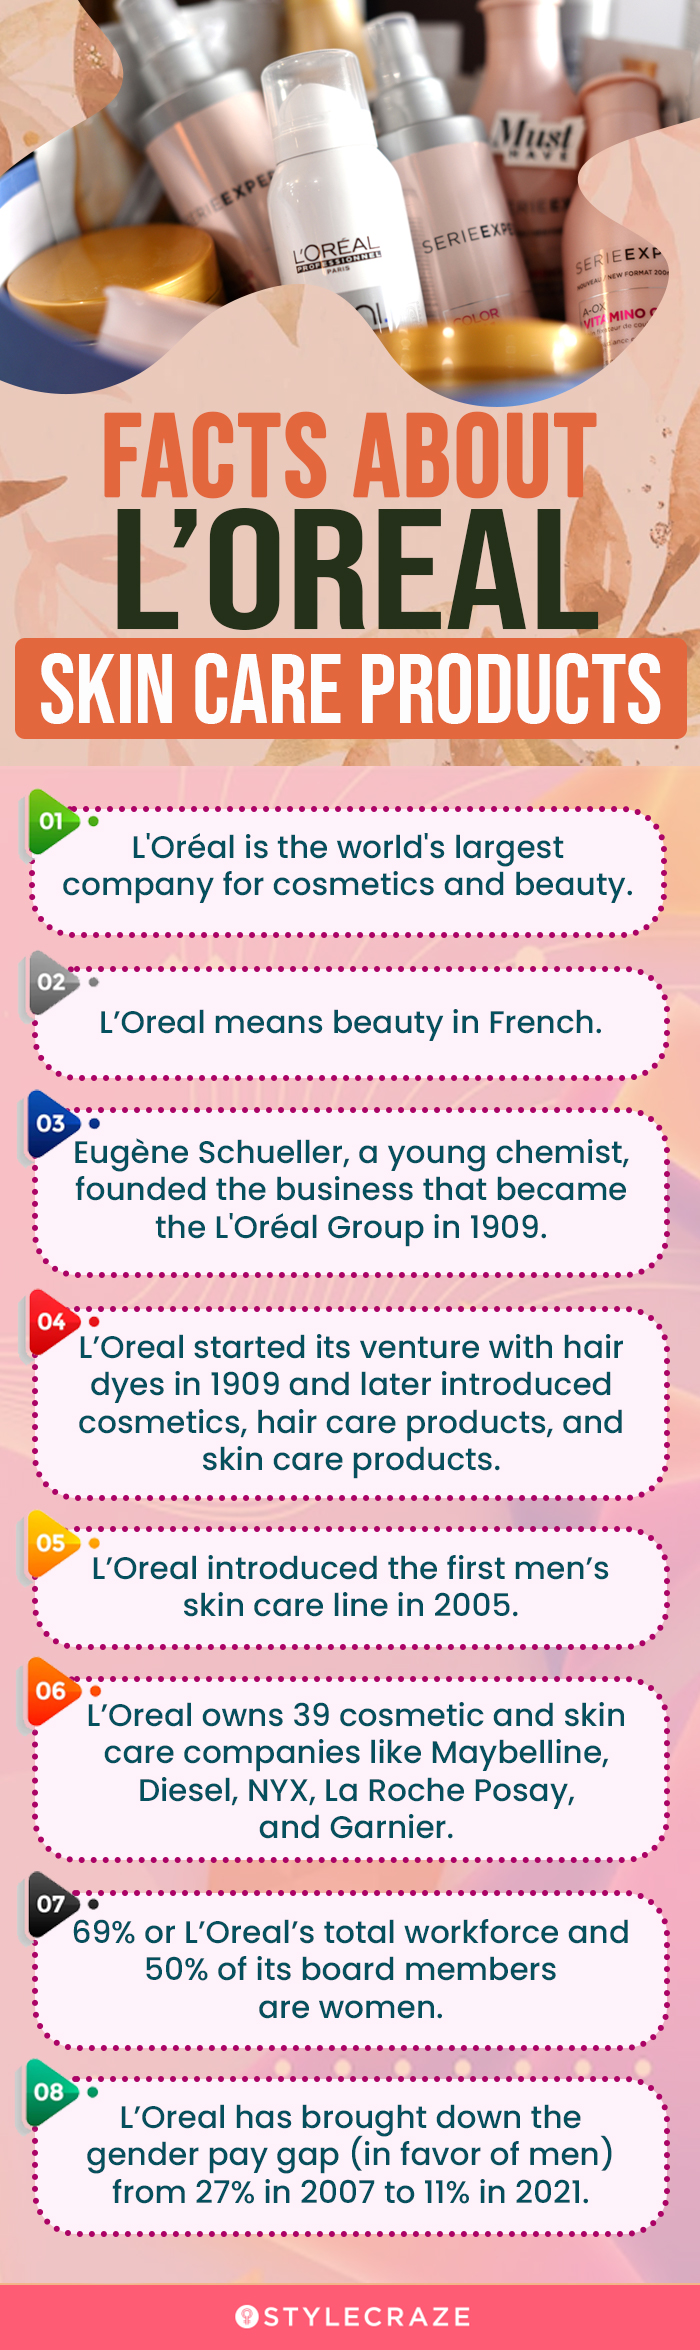 Facts About L’Oreal Skin Care Products (infographic)